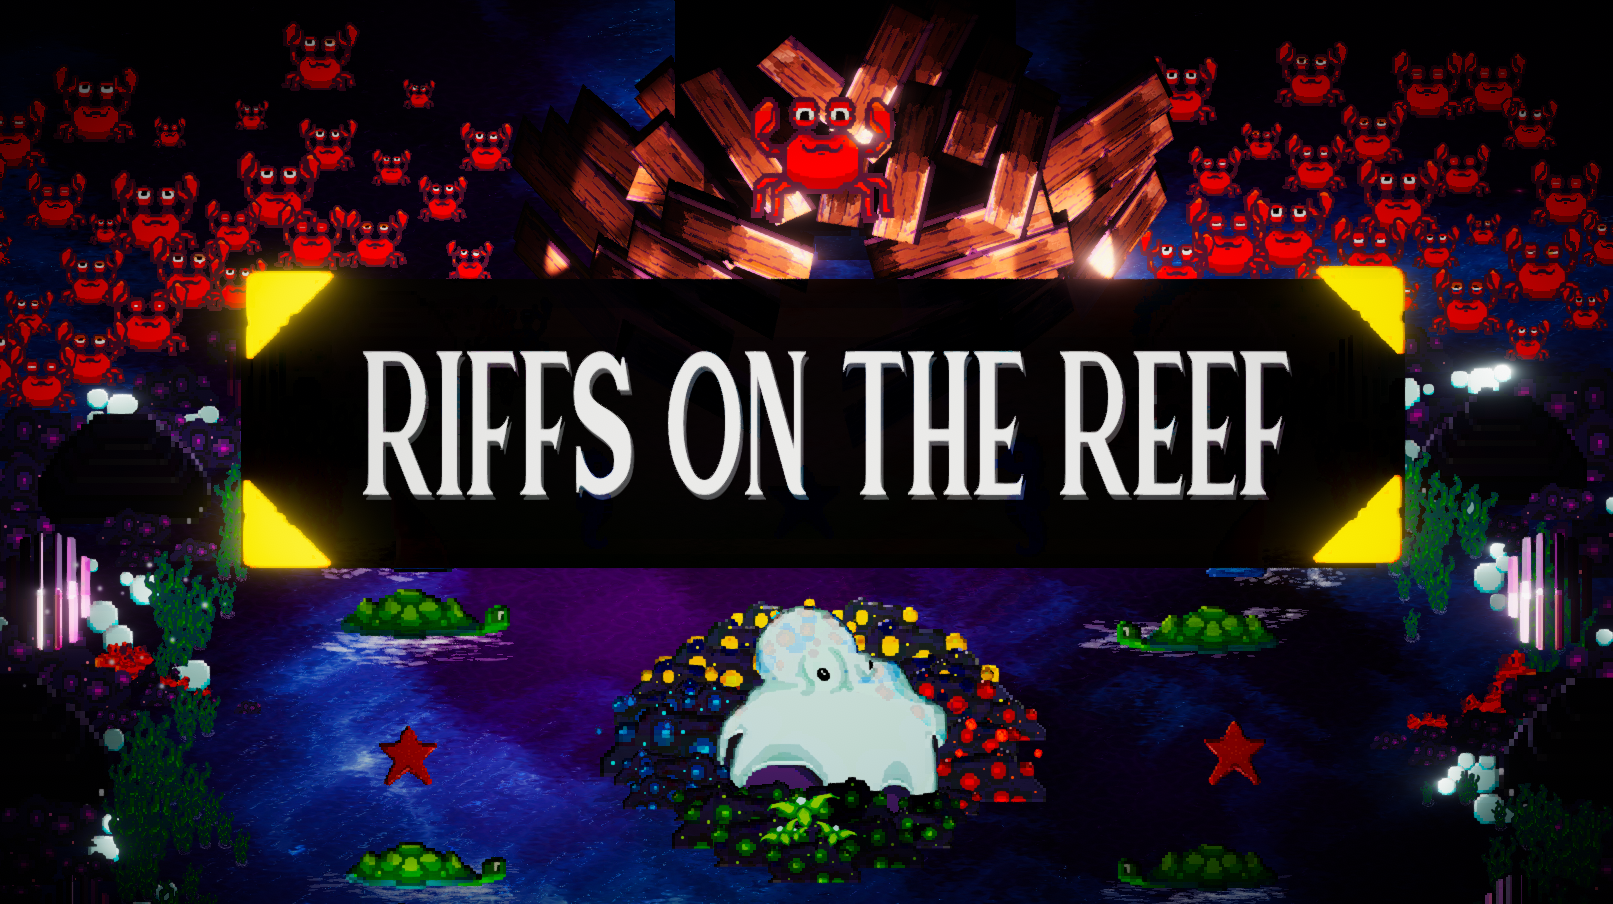 Riffs on the Reef